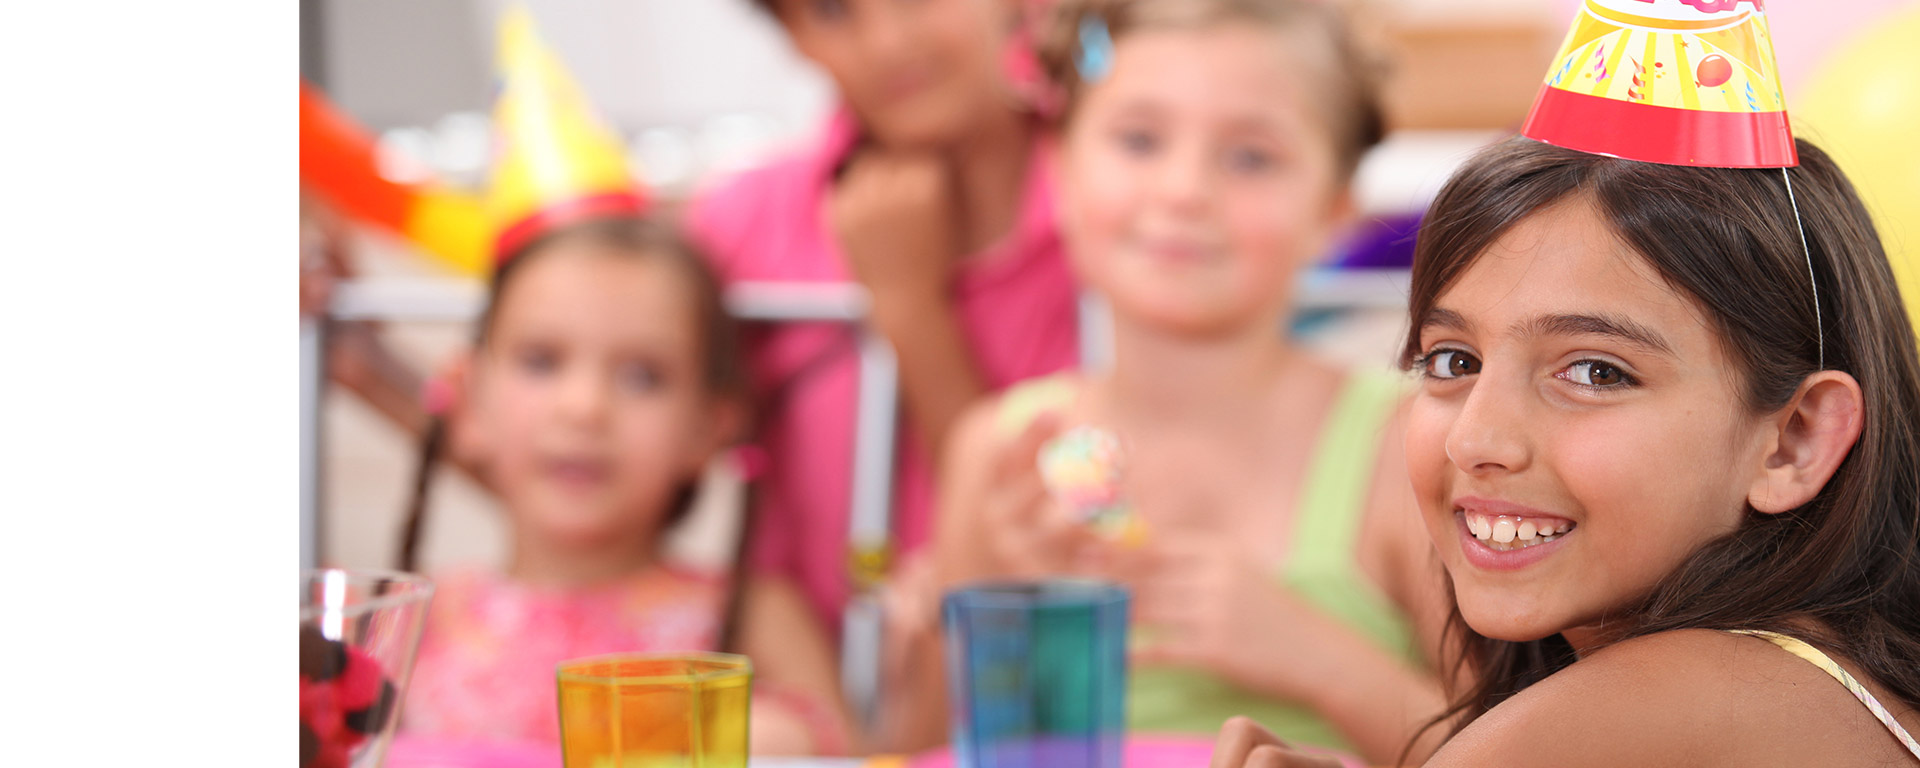 Birthday parties with food allergies